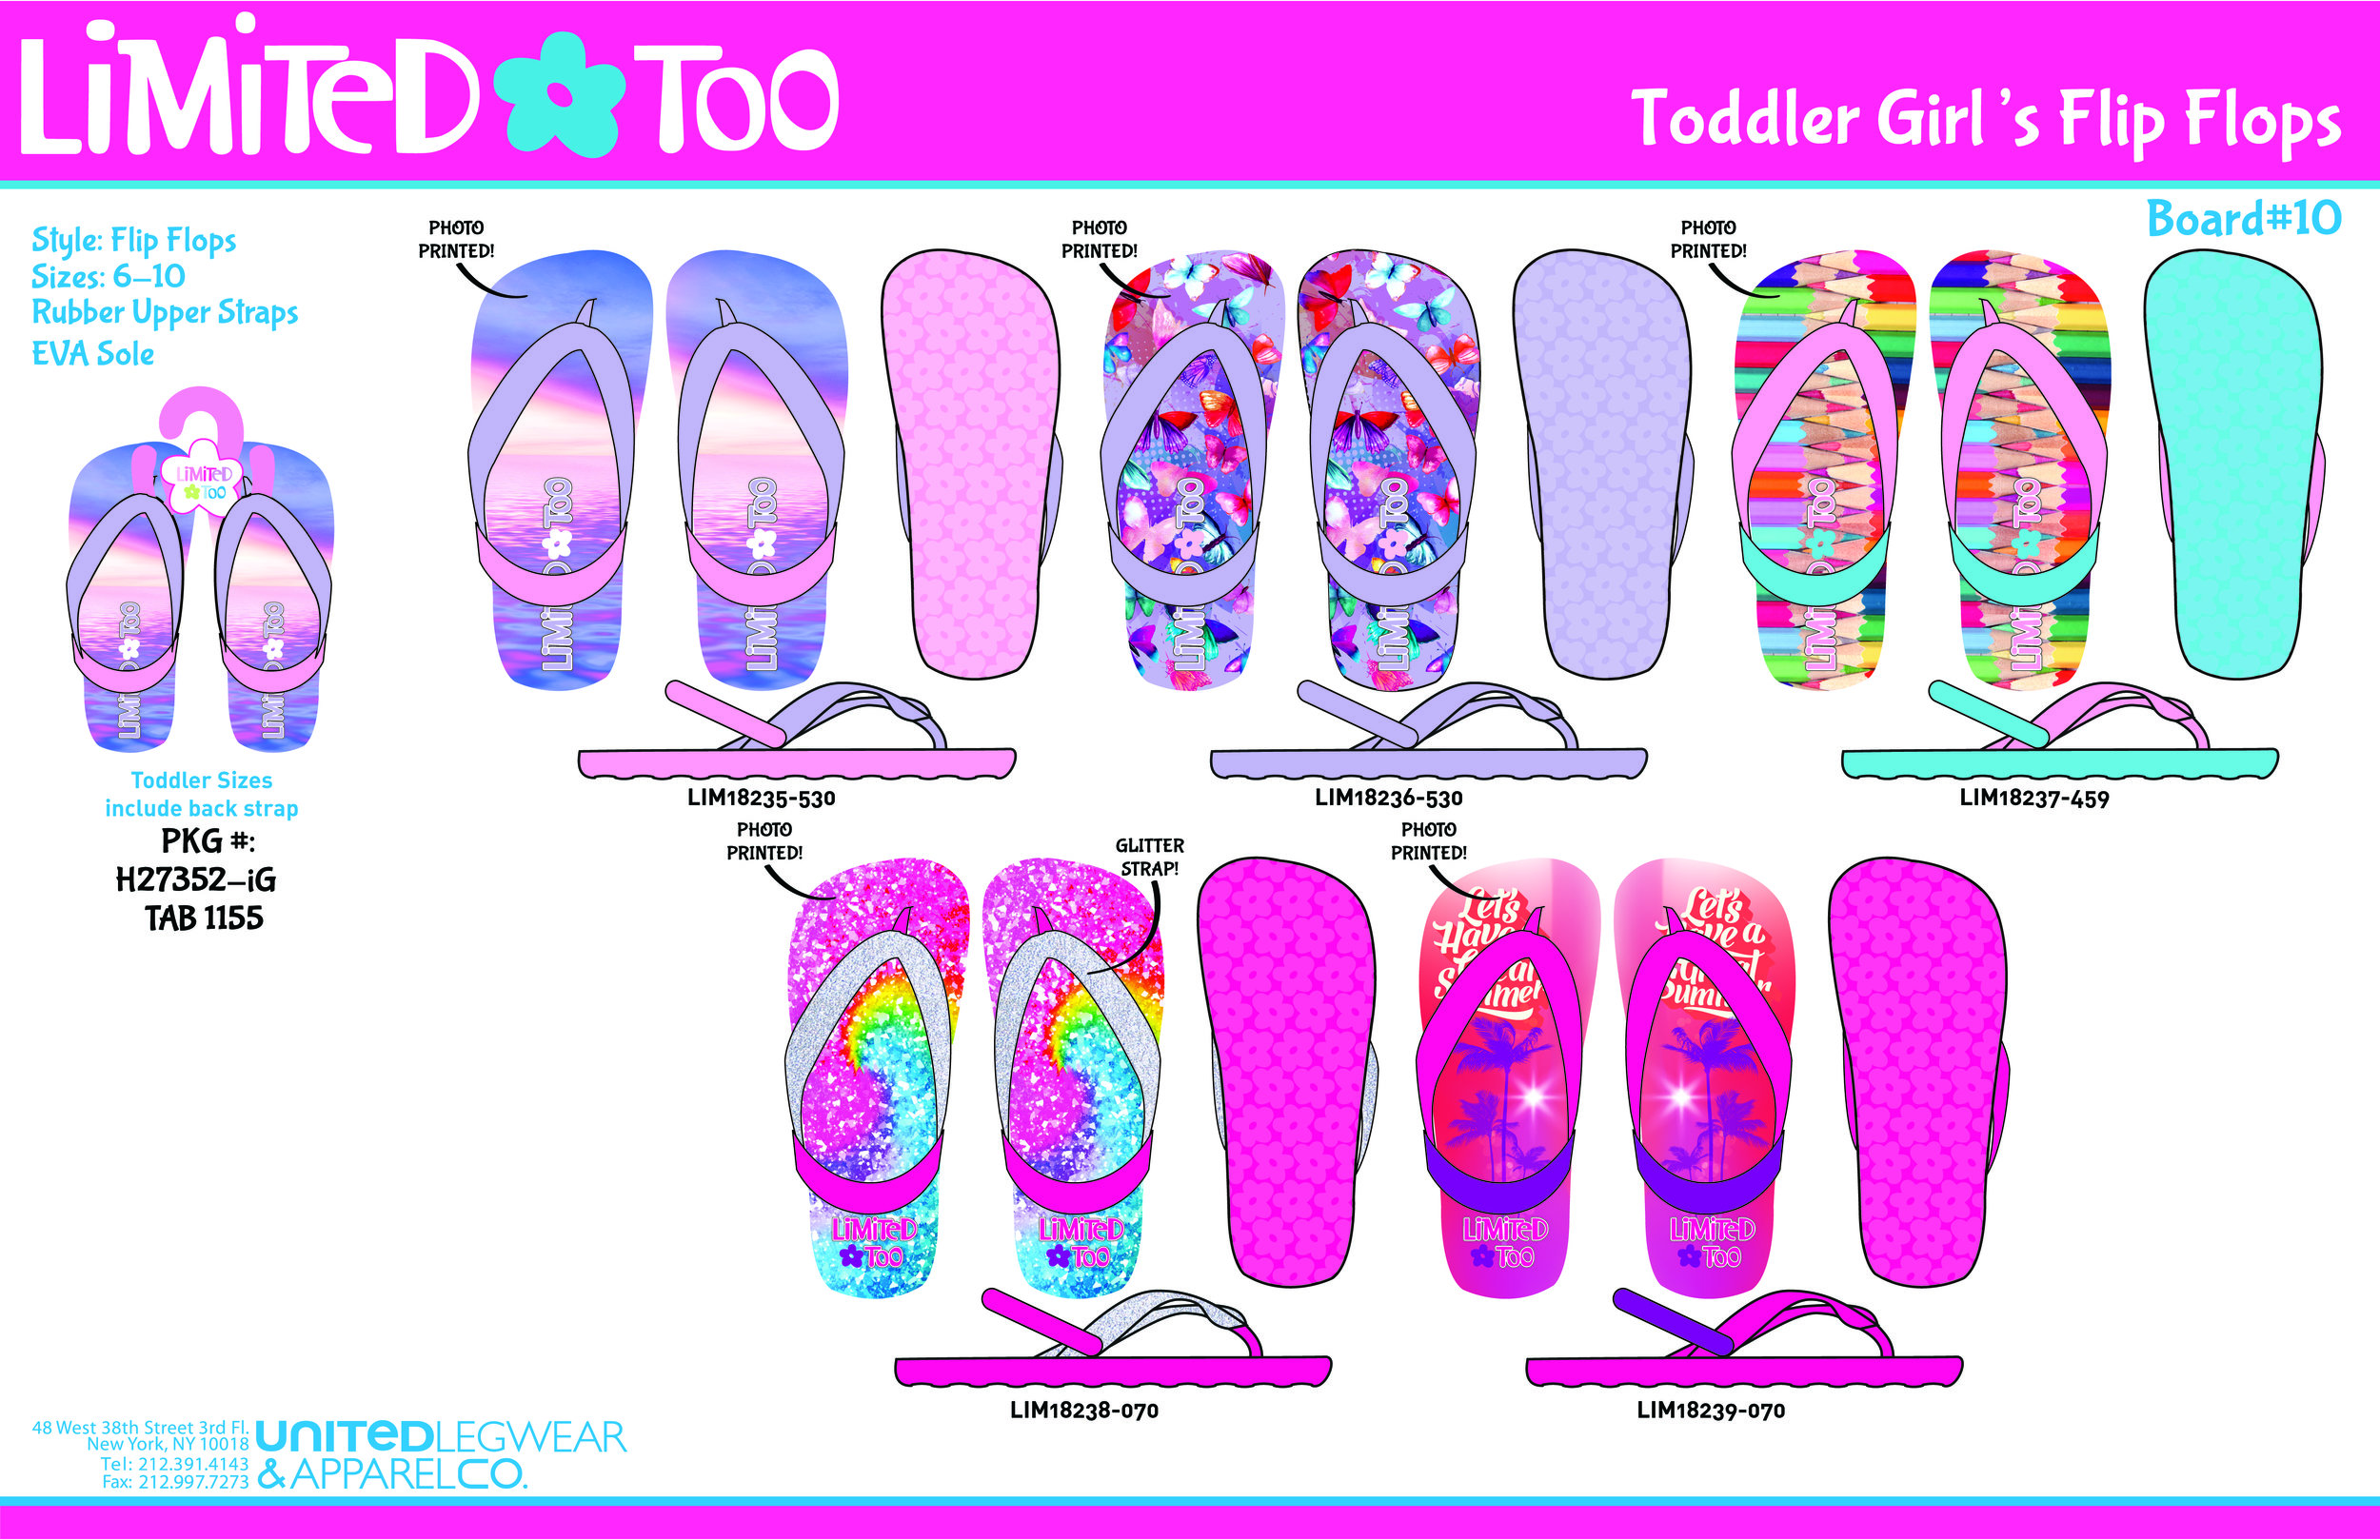 BOARD010- Limited Too Toddlers Flip Flops-SS17-01.jpg